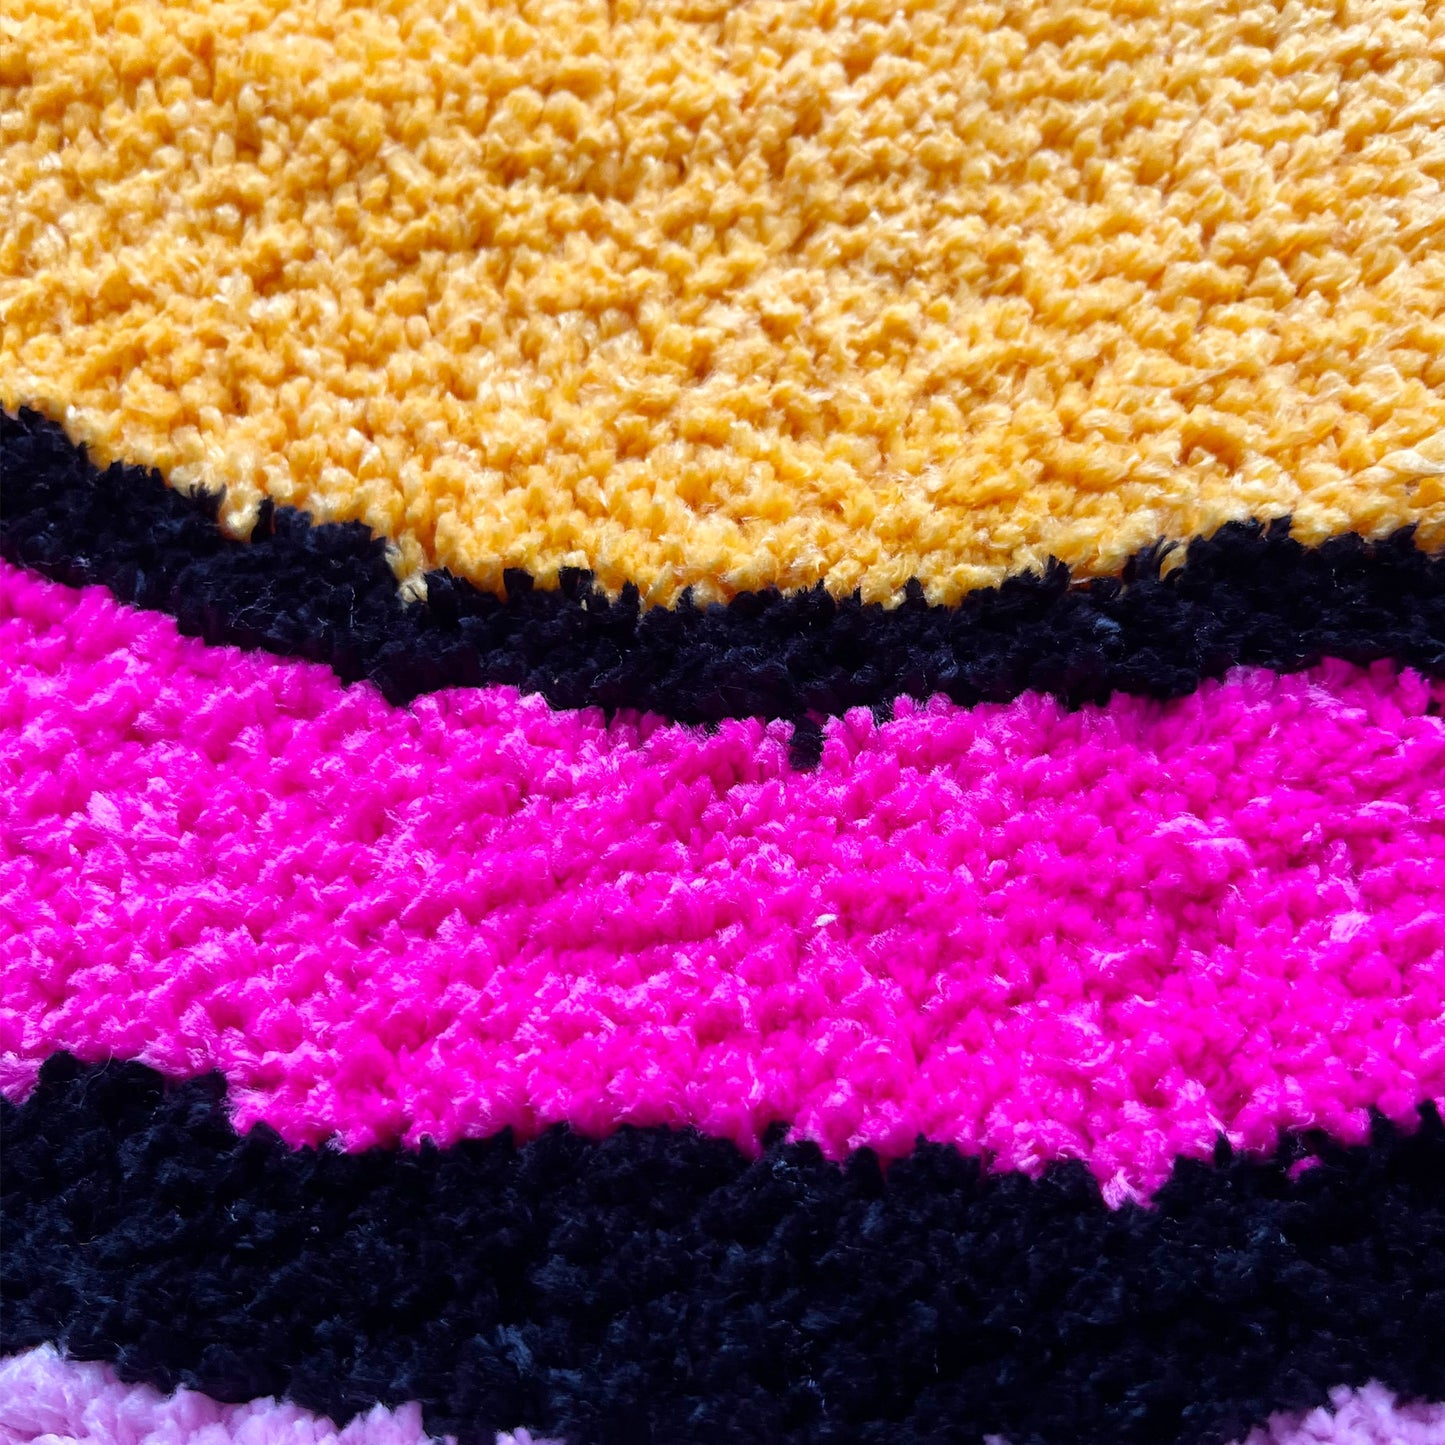 CORX Designs - Cherry Bomb Pink Rug - Review